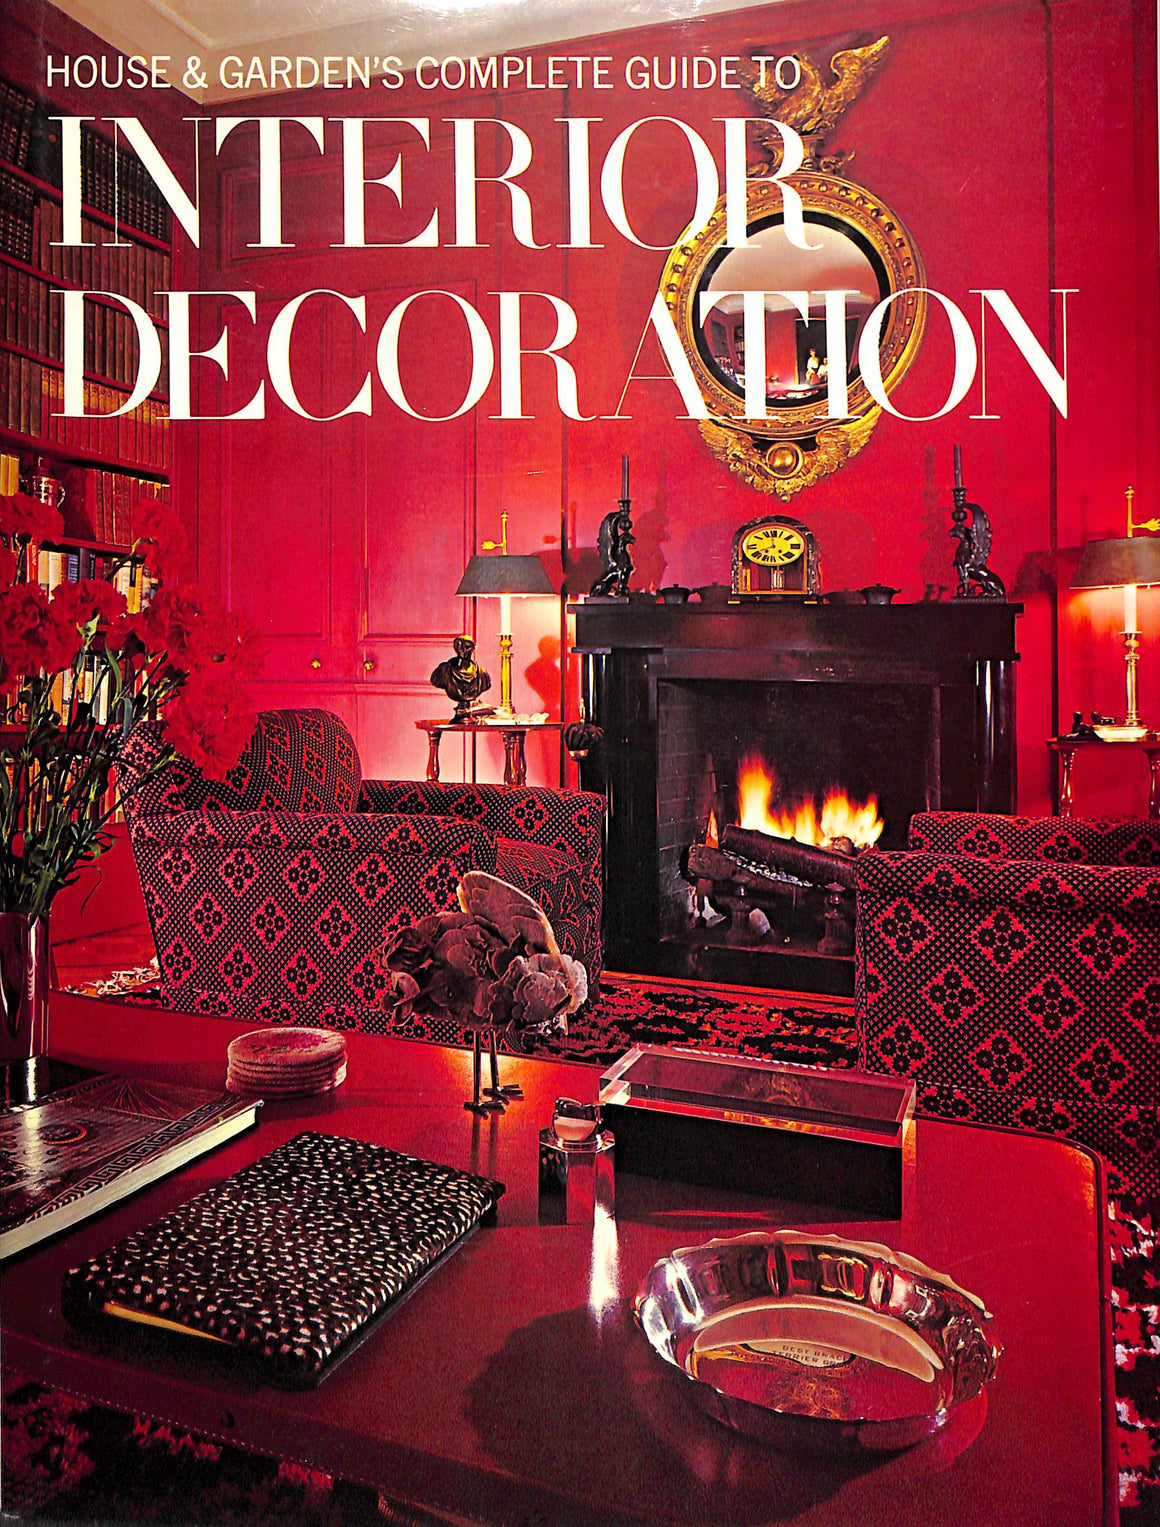 "Interior Decoration by The Editors of House & Garden" (SOLD)